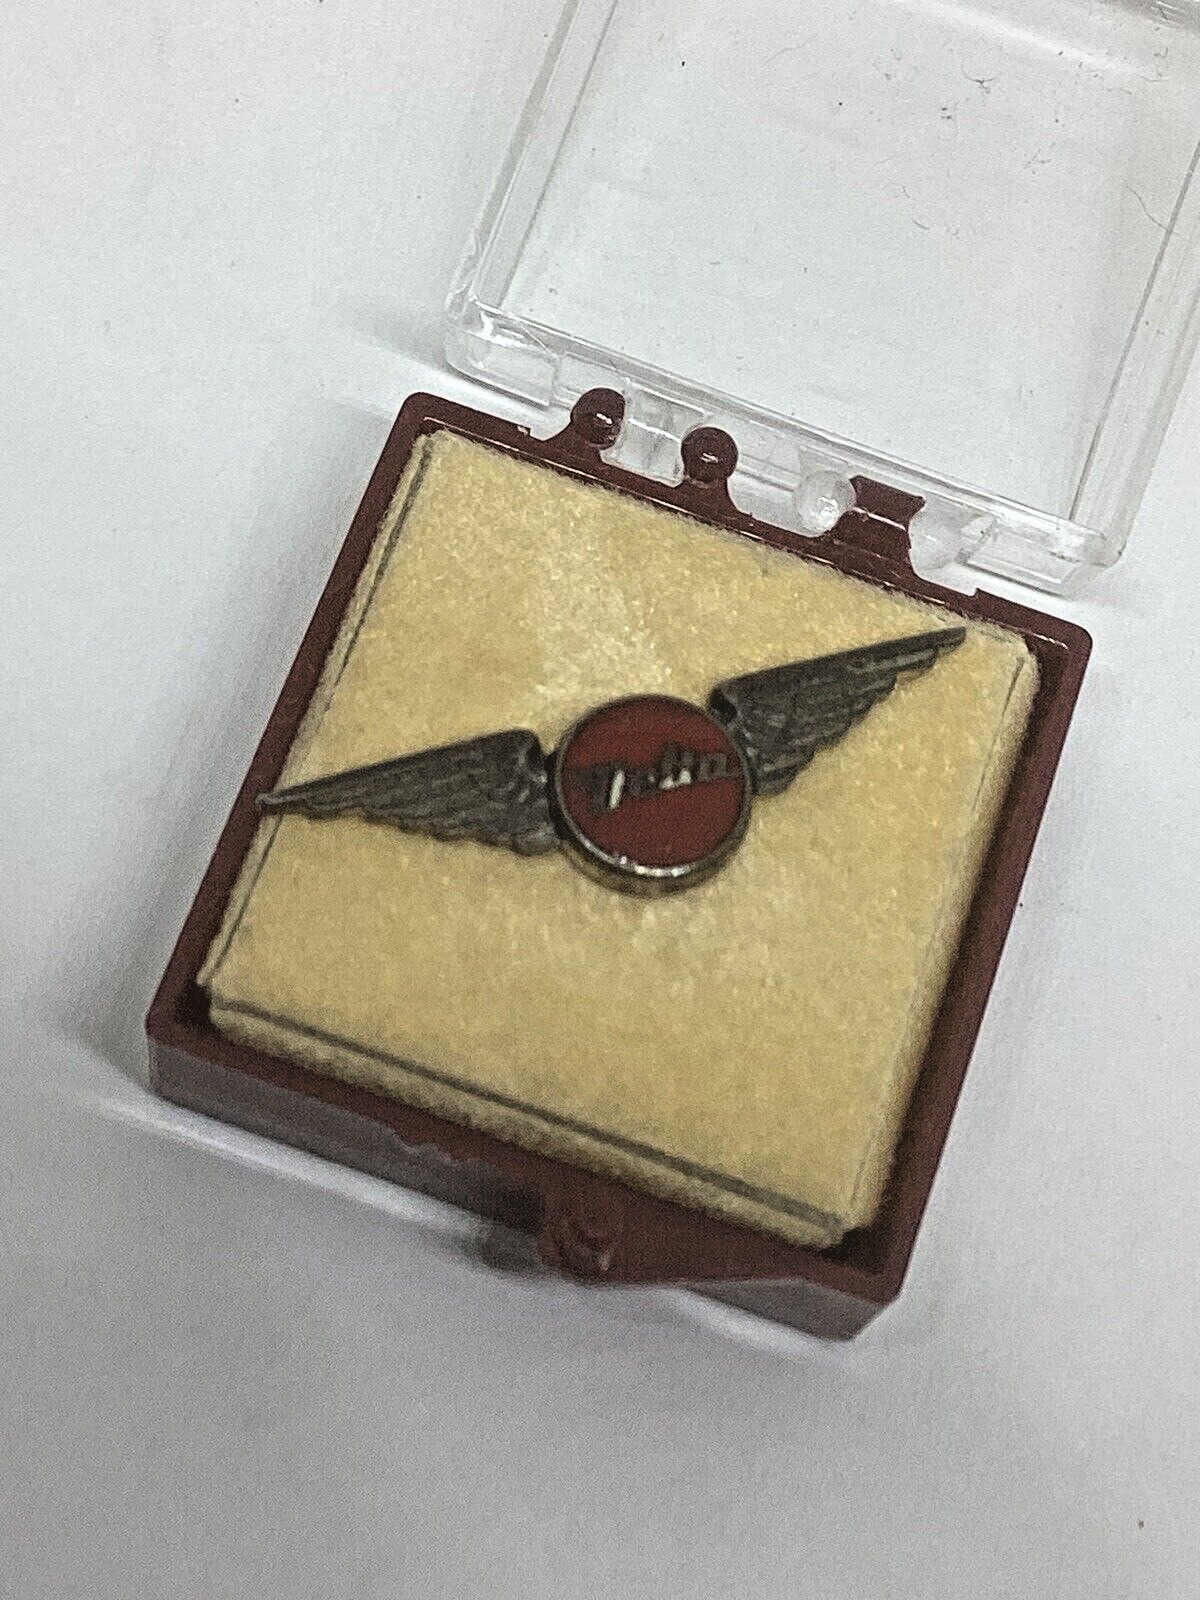 DELTA AIR LINES STERLING SILVER LAPEL PIN 1940'S in Original Box